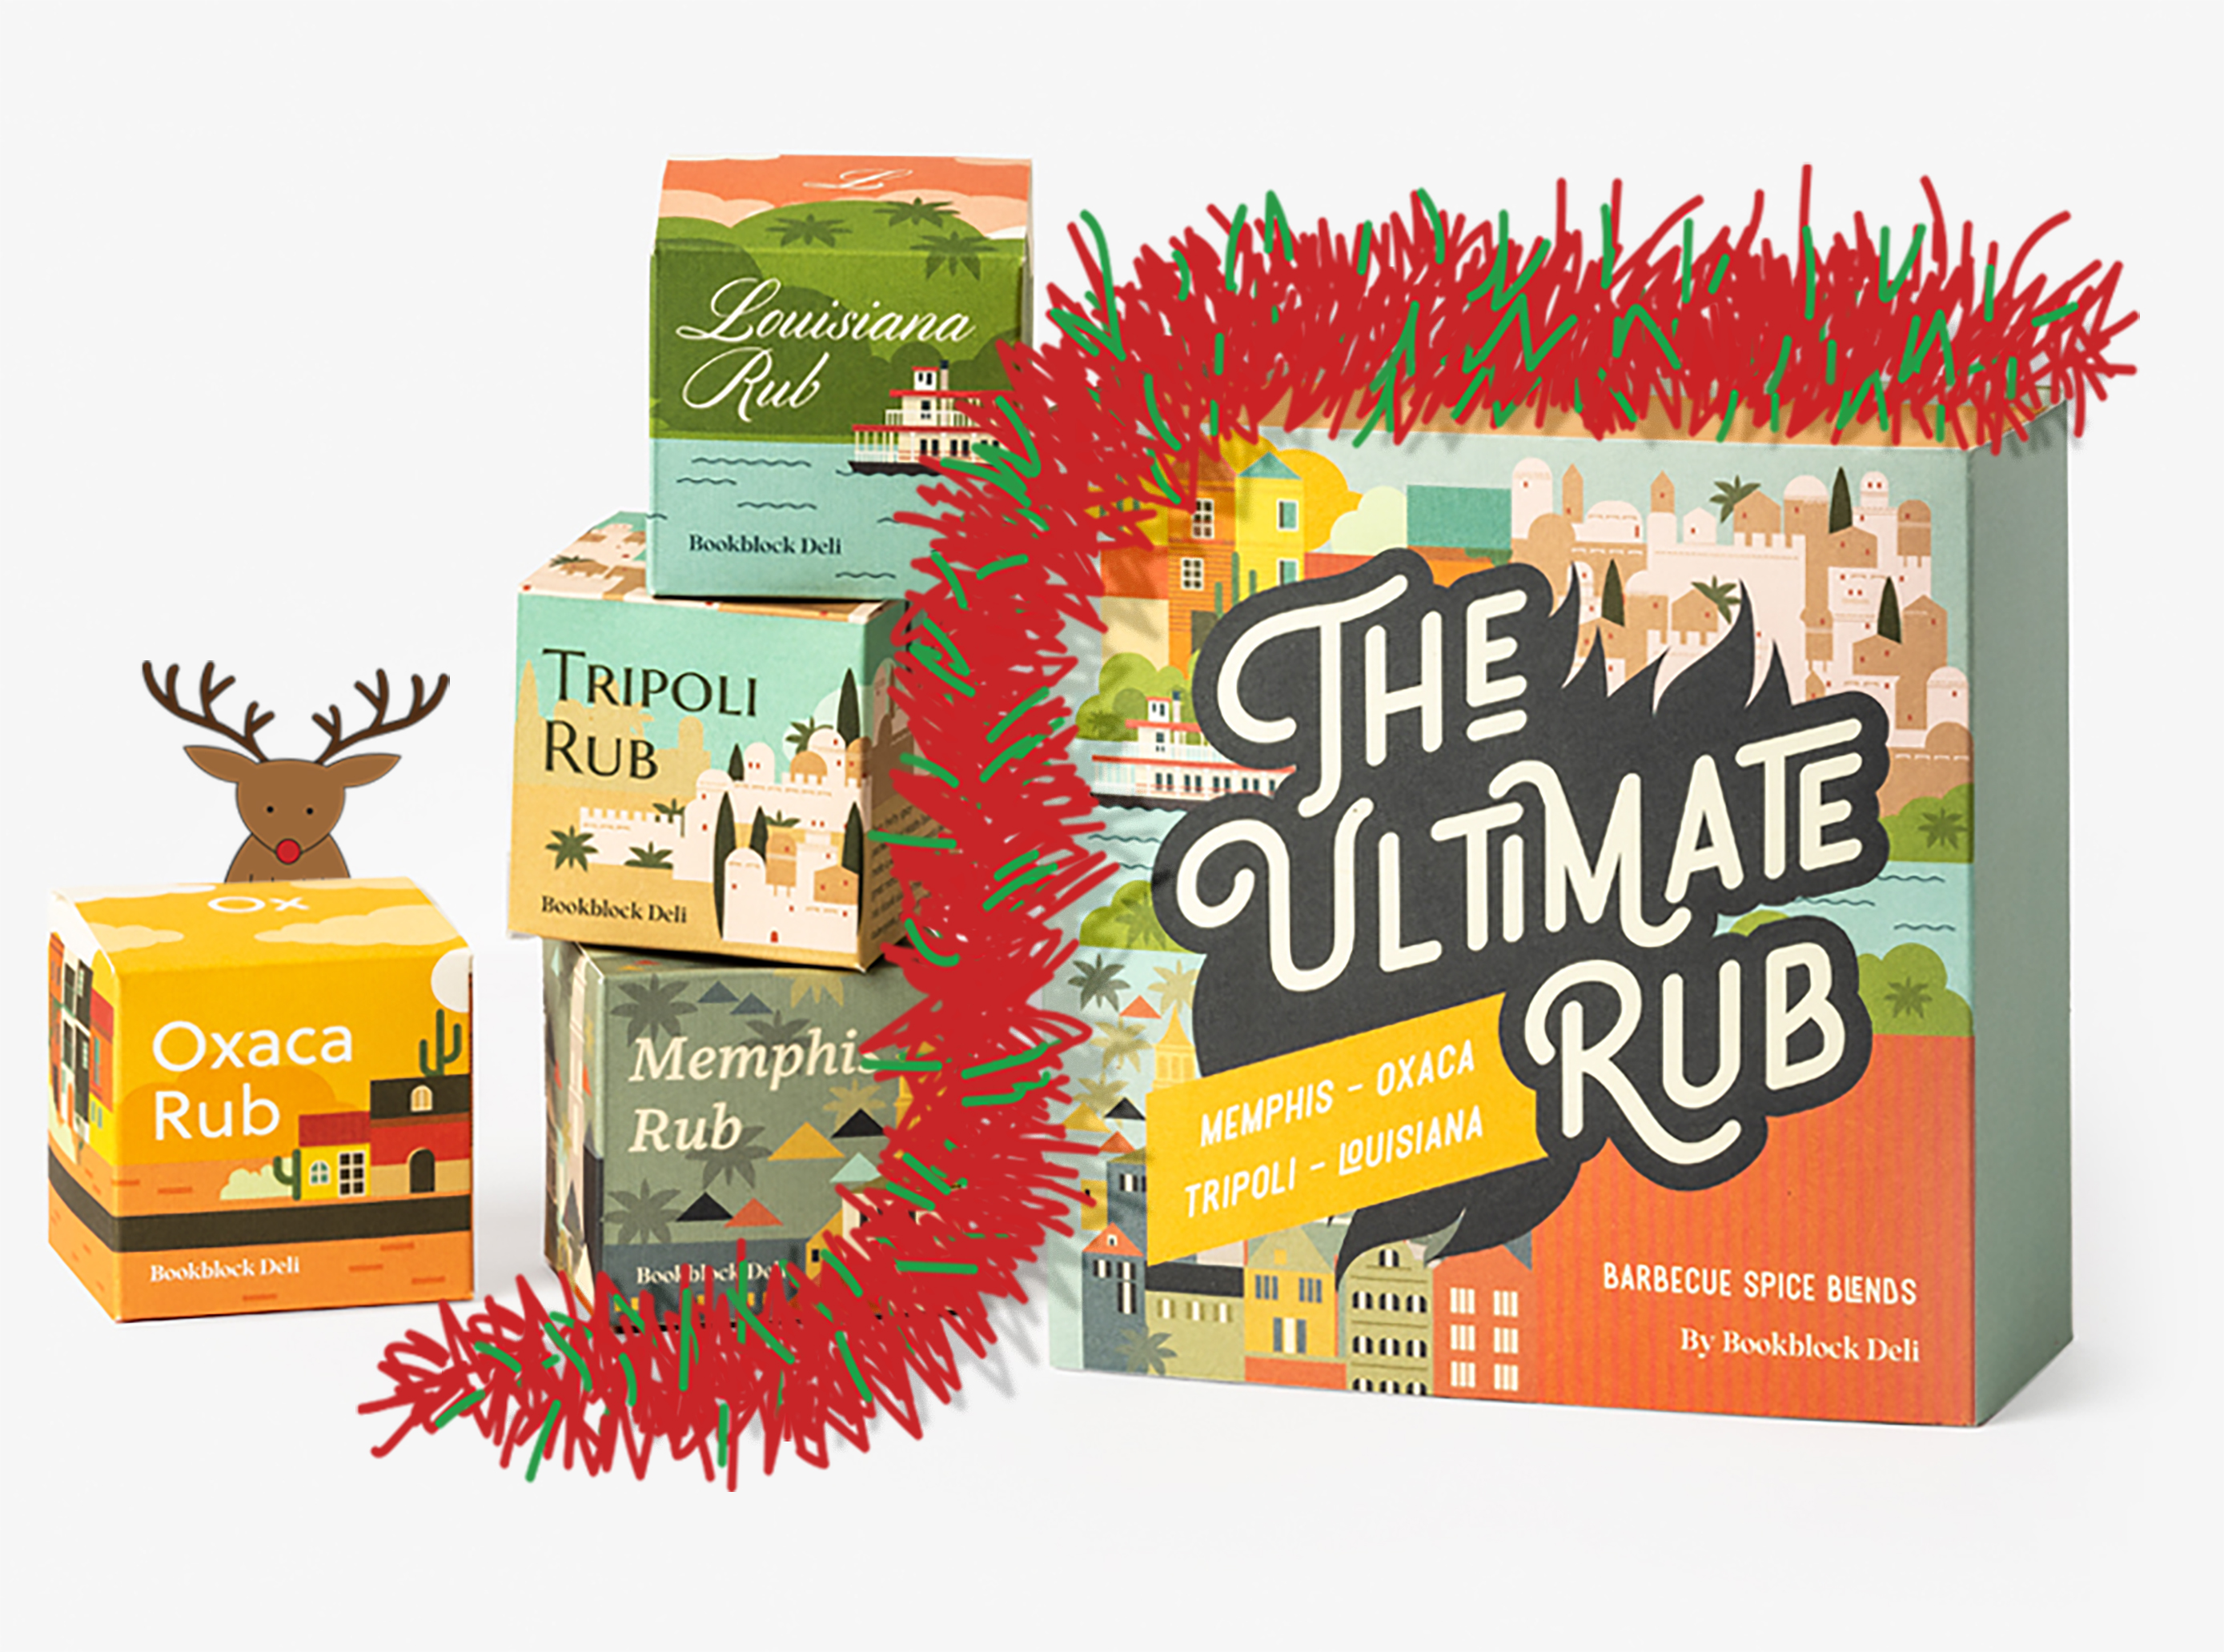 Ultimate Rub Selection with tinsel illustration in red and green for decoration